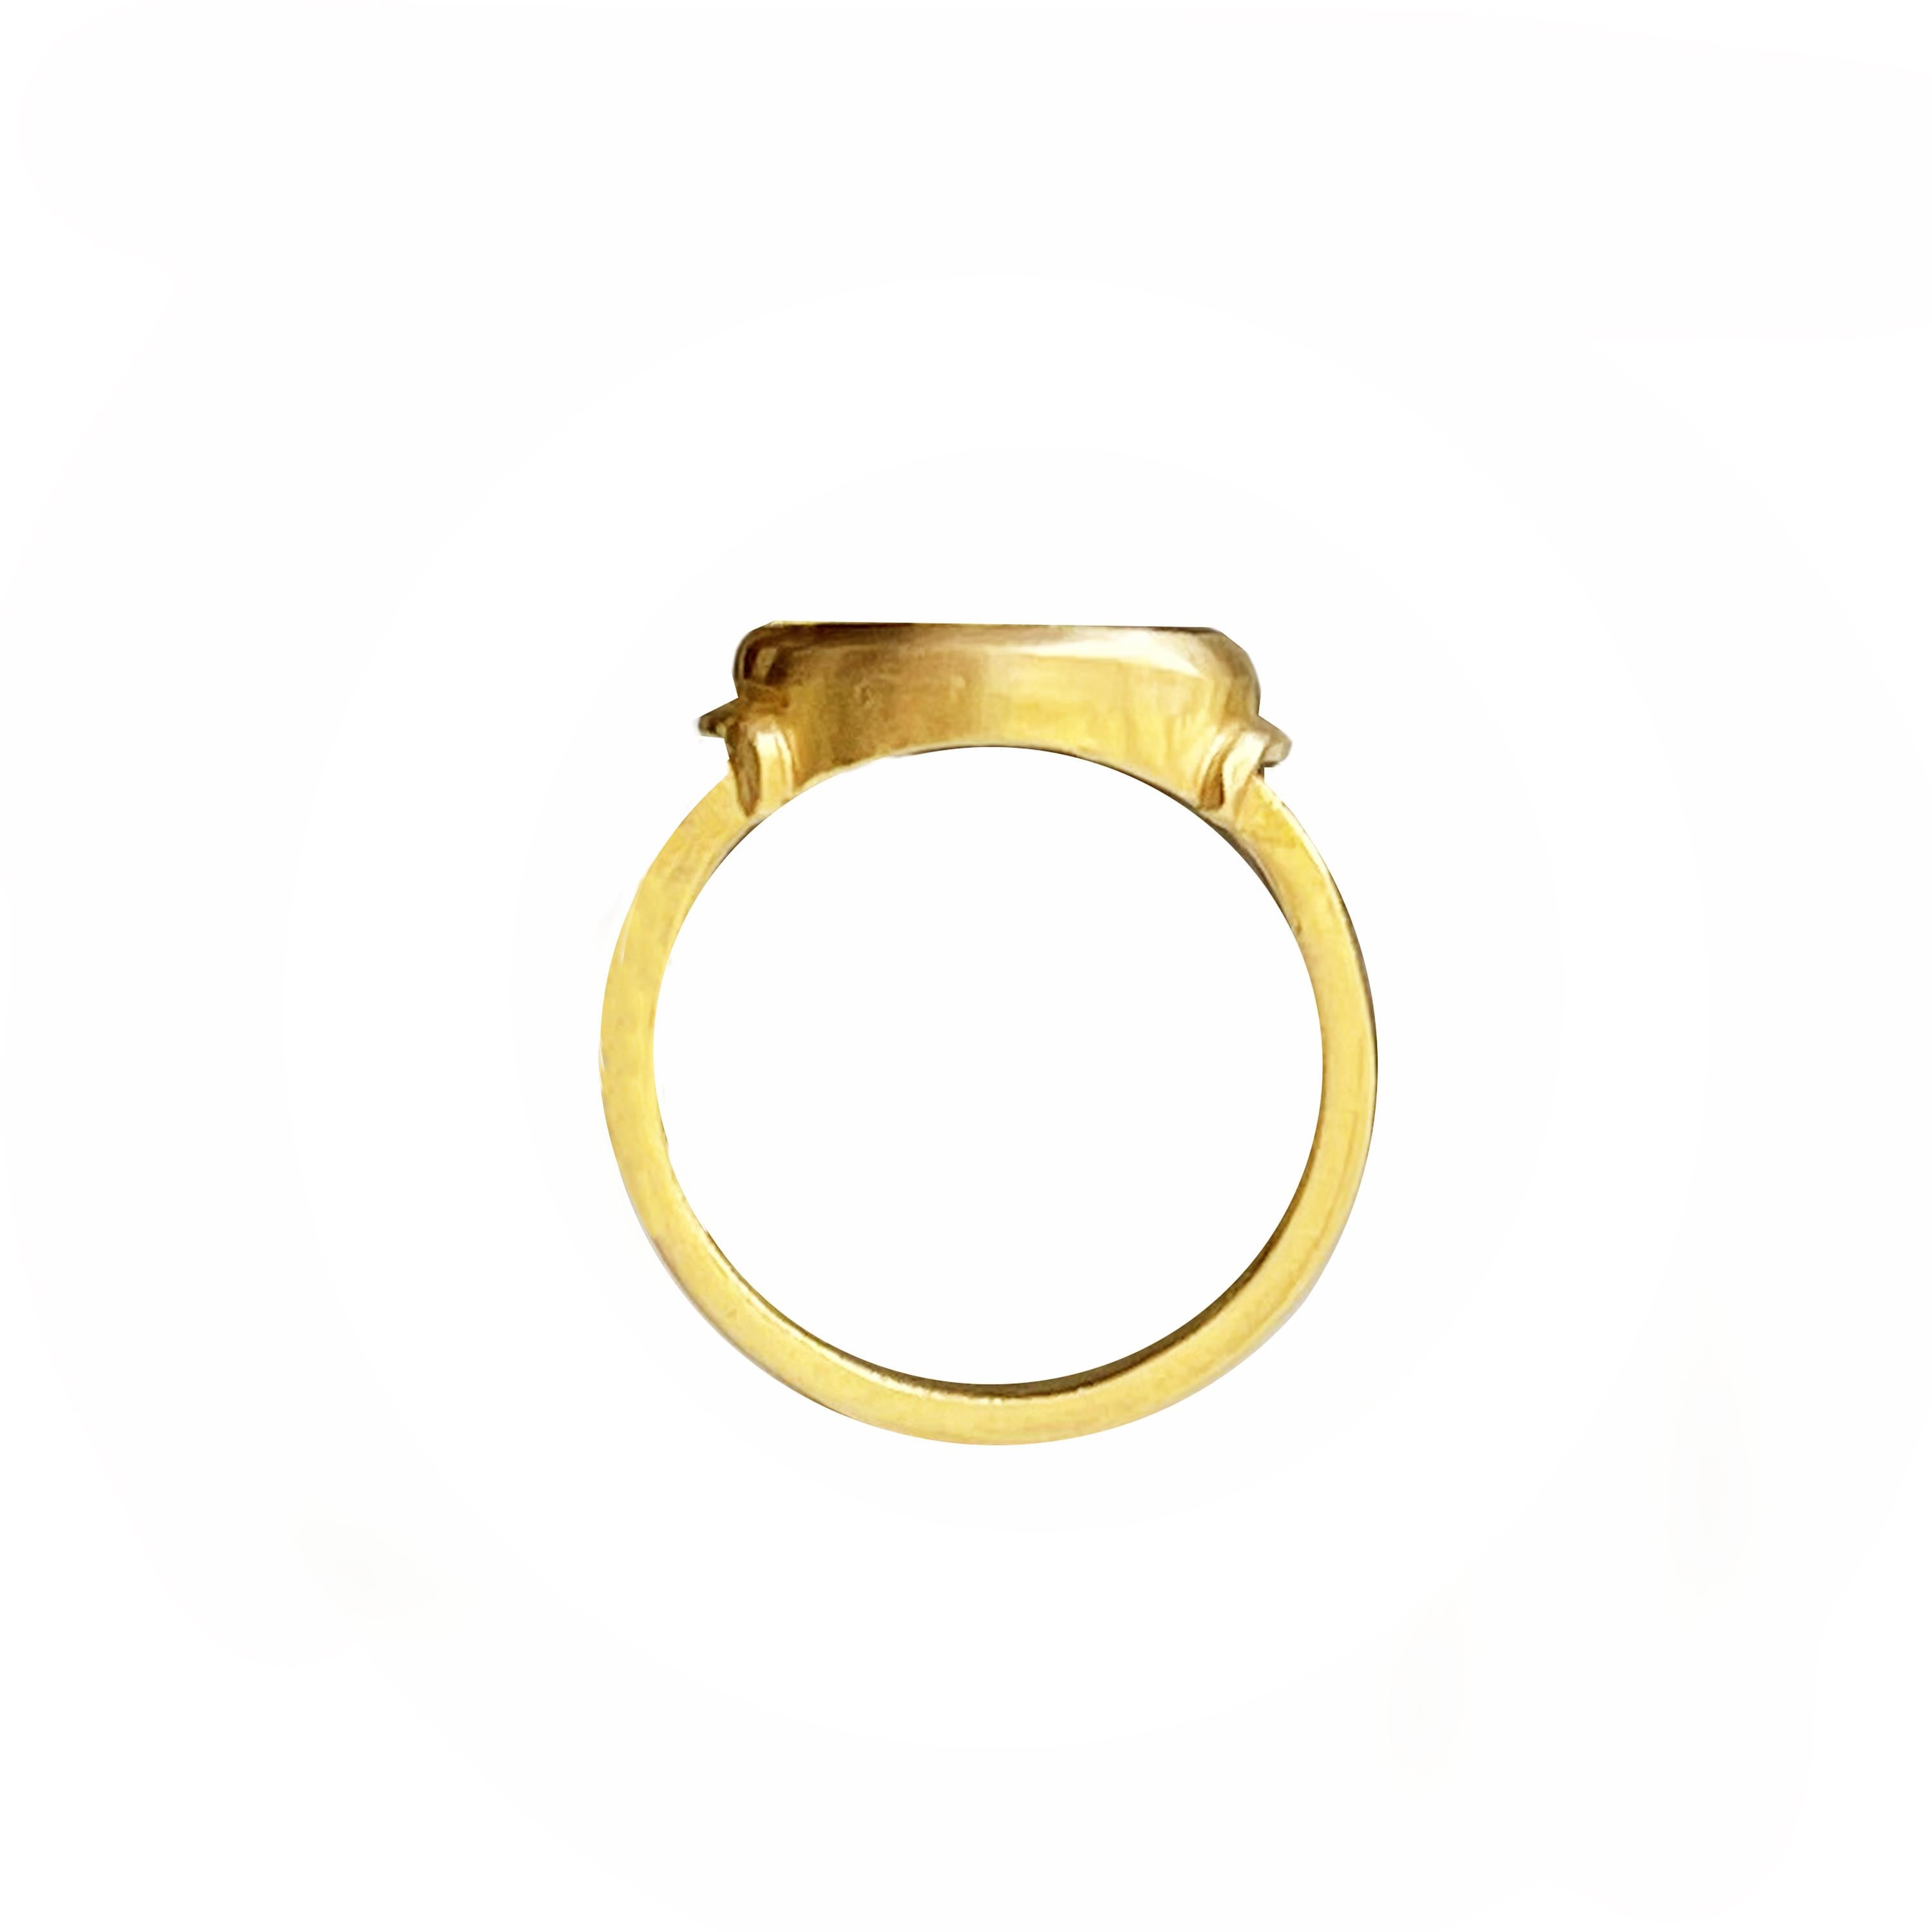 Classical Roman Roman Onyx Intaglio Gold Ring Depicting a Fortune with Horn of Plenty and Rudder